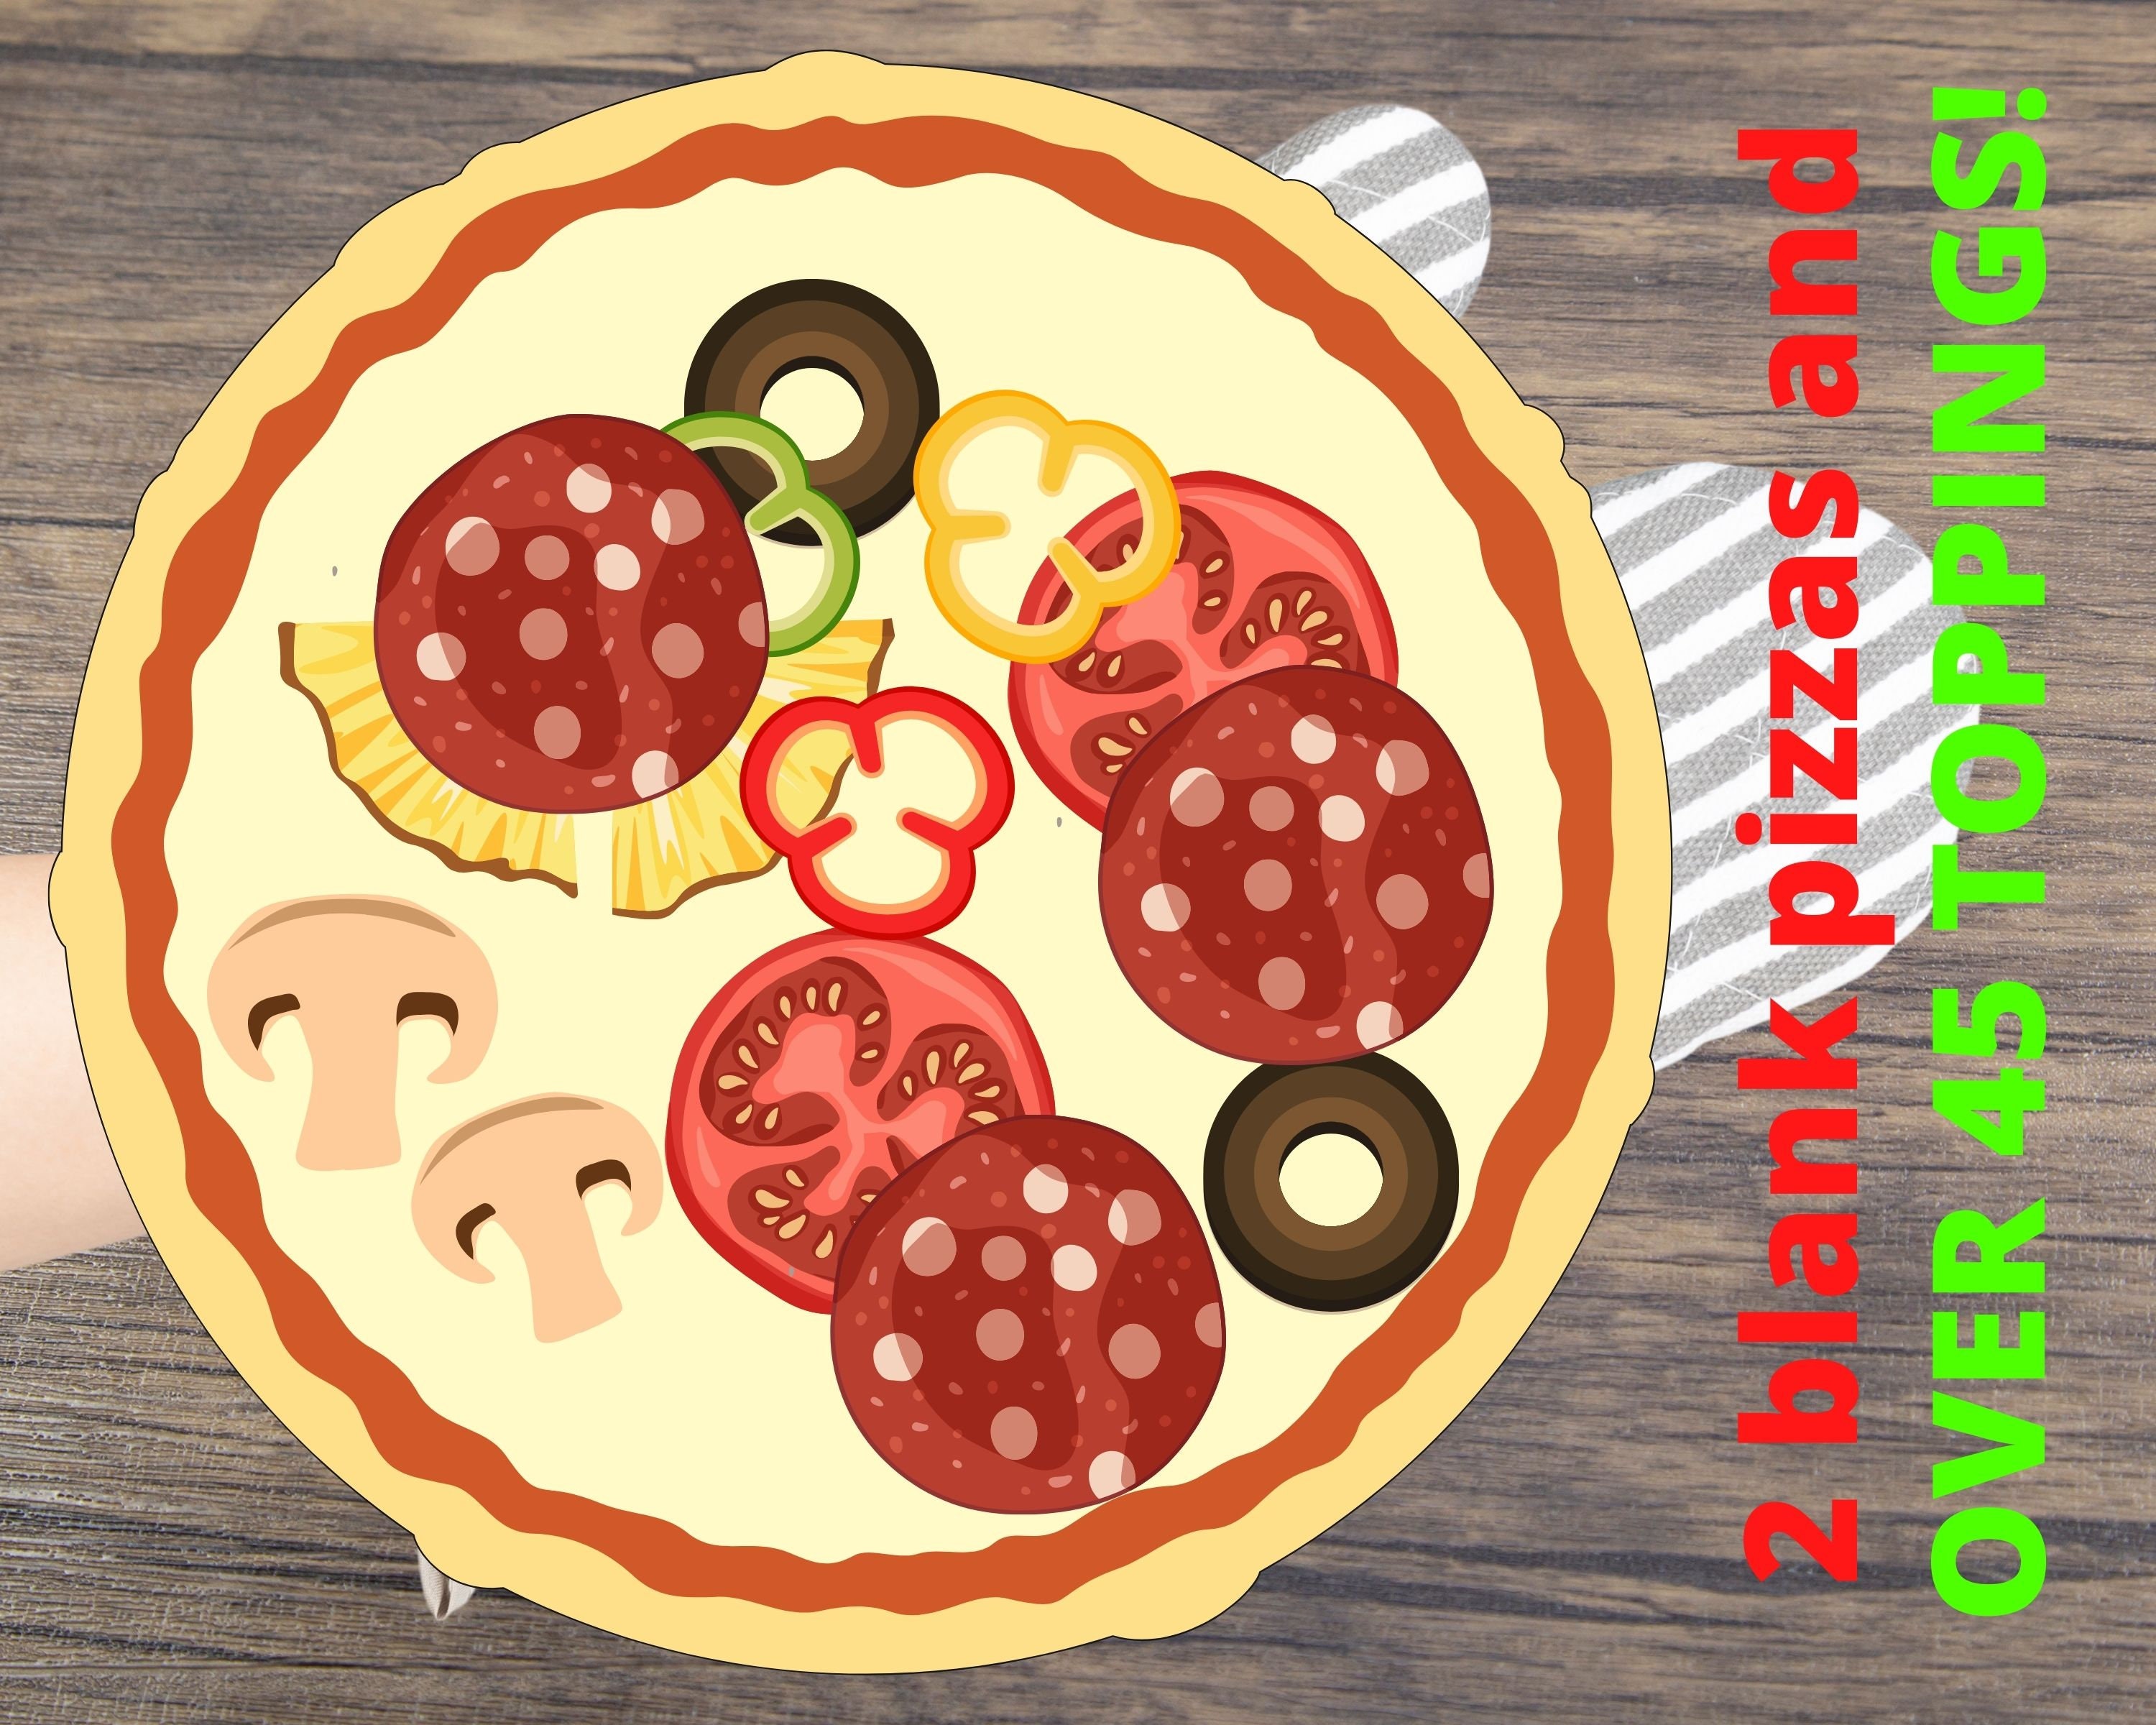  Let's Make a Pizza - Pretend Food Playset with 4 Wooden Pie  Slices, 140 Felt Toppings, Wood Roller, and 3-in-1 Cardboard Box Prep  Station, Oven, & Serving Table - Cute Cooking